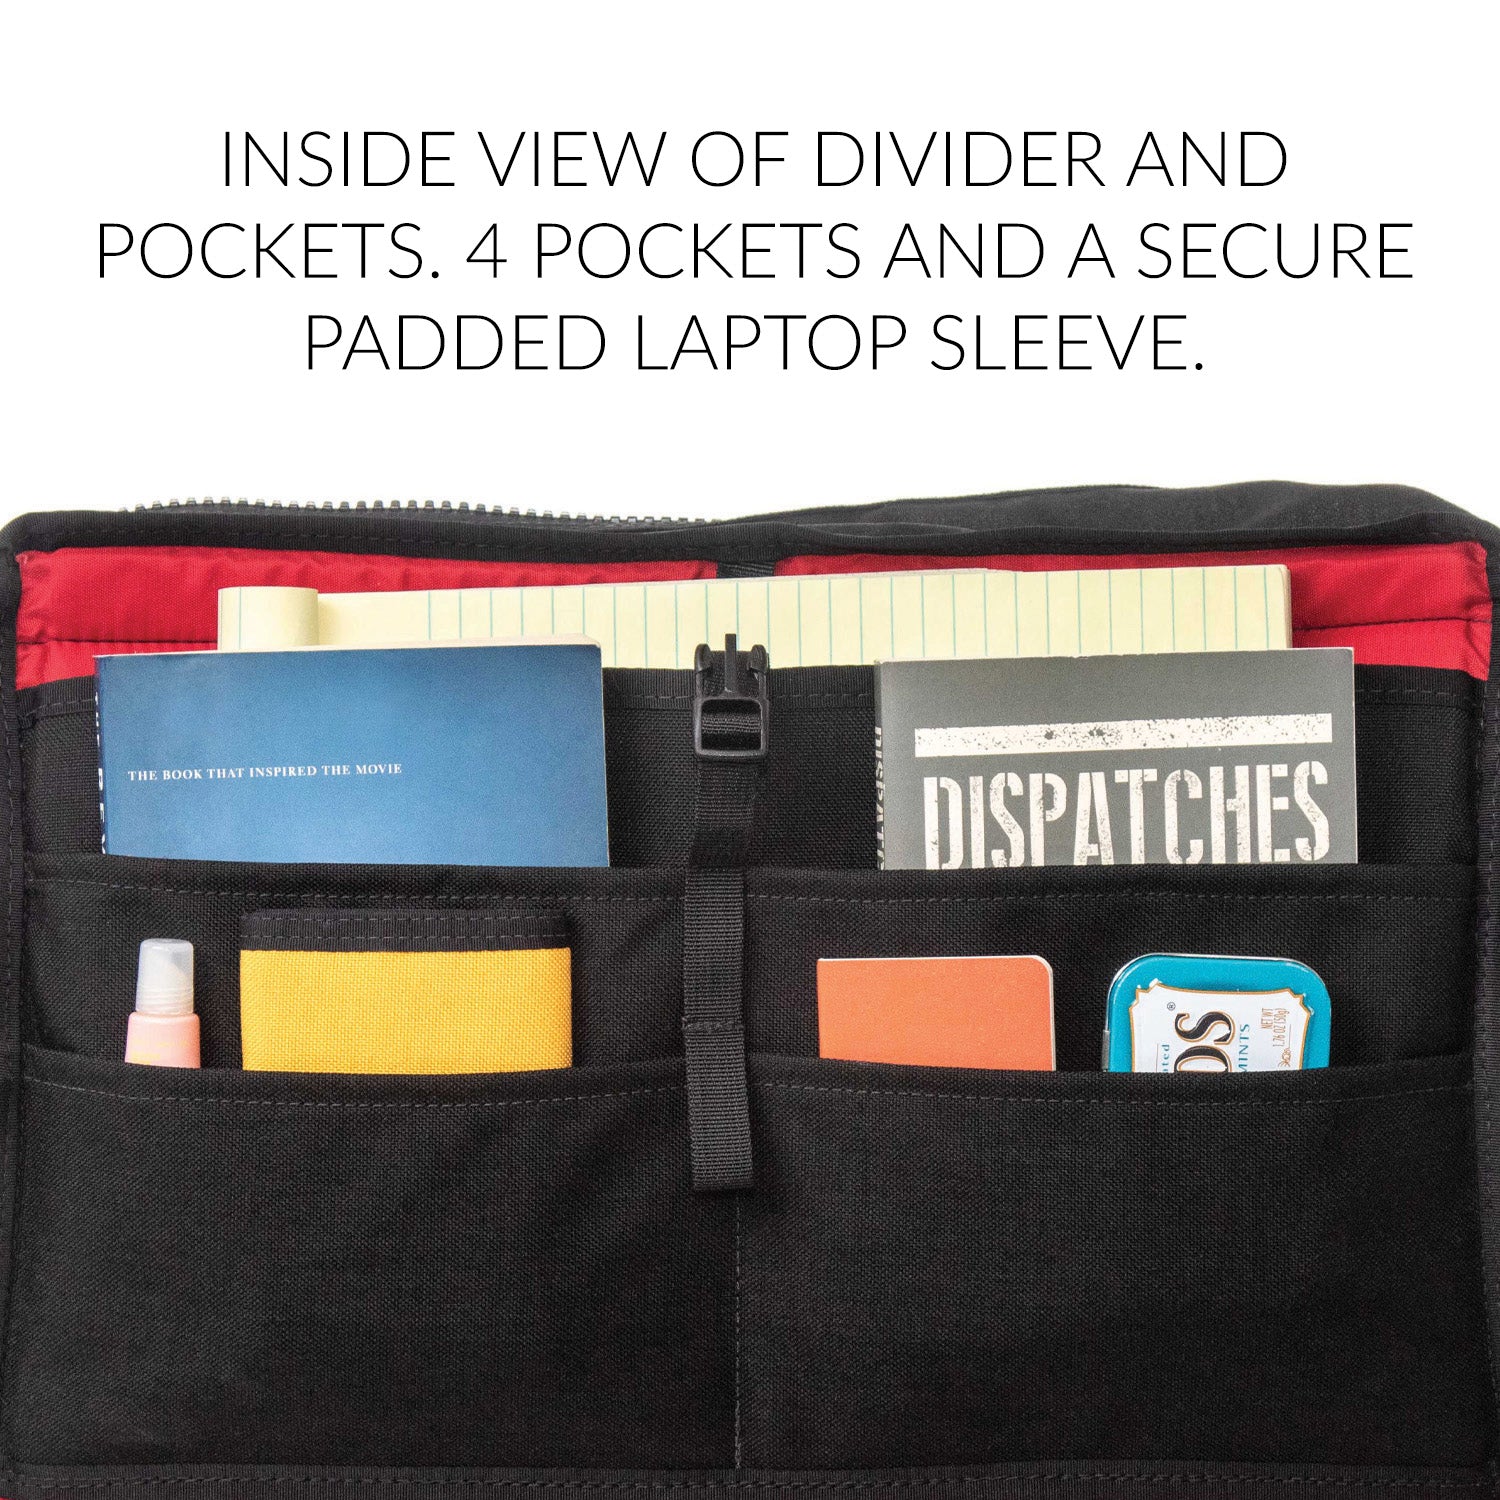 Inside view of divider and pockets. 4 pockets and a secure padded laptop sleeve. 